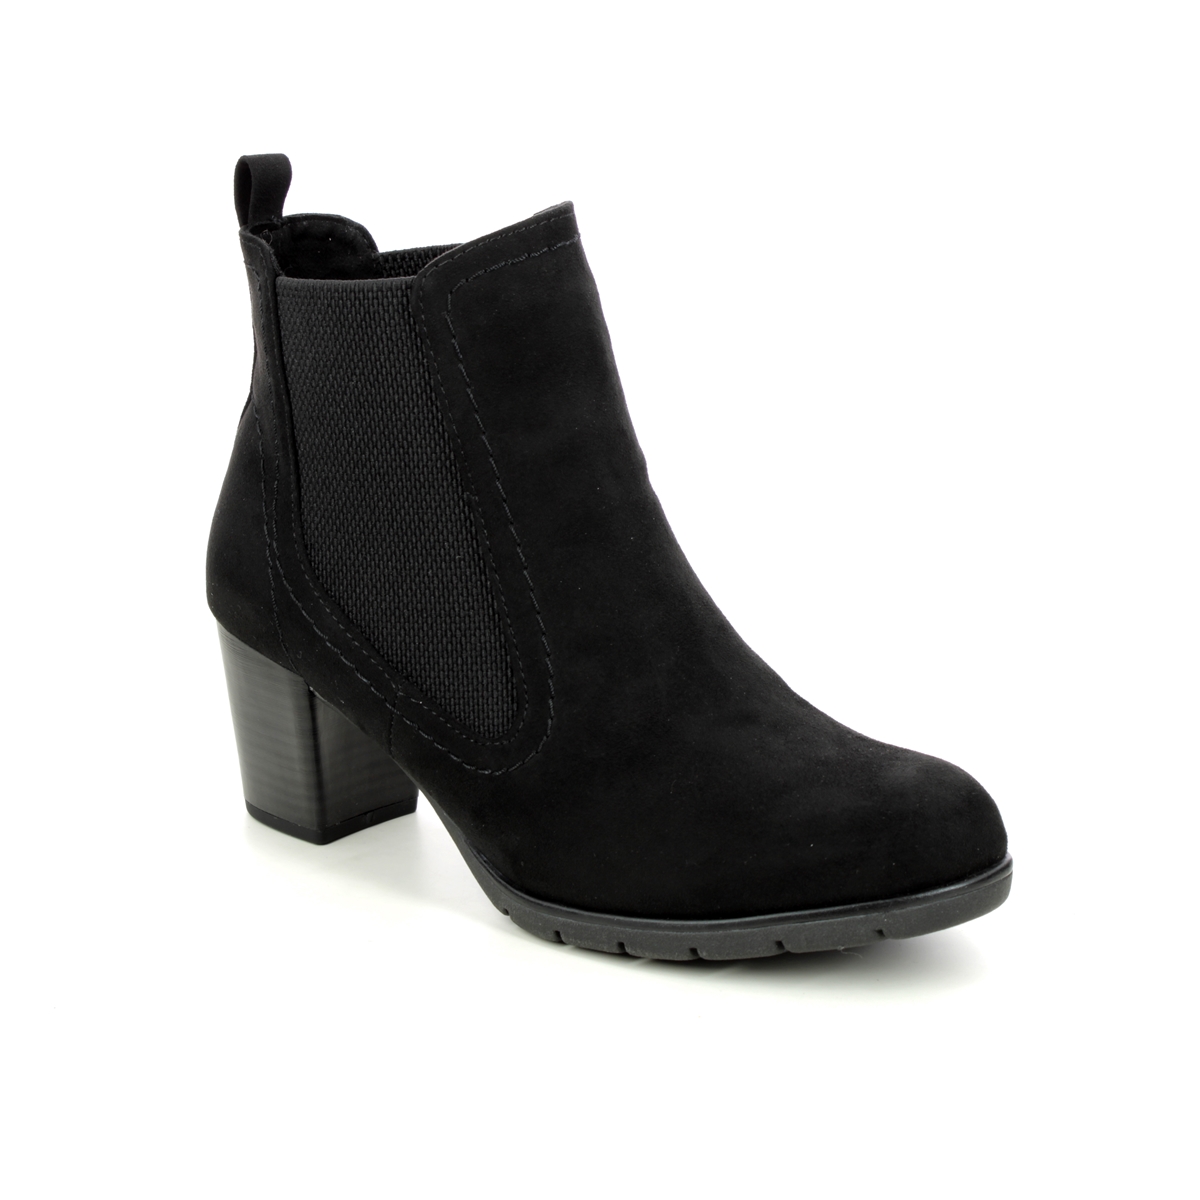 Marco Tozzi Pepa   05 Black Womens Ankle Boots 25355-35-098 In Size 39 In Plain Black